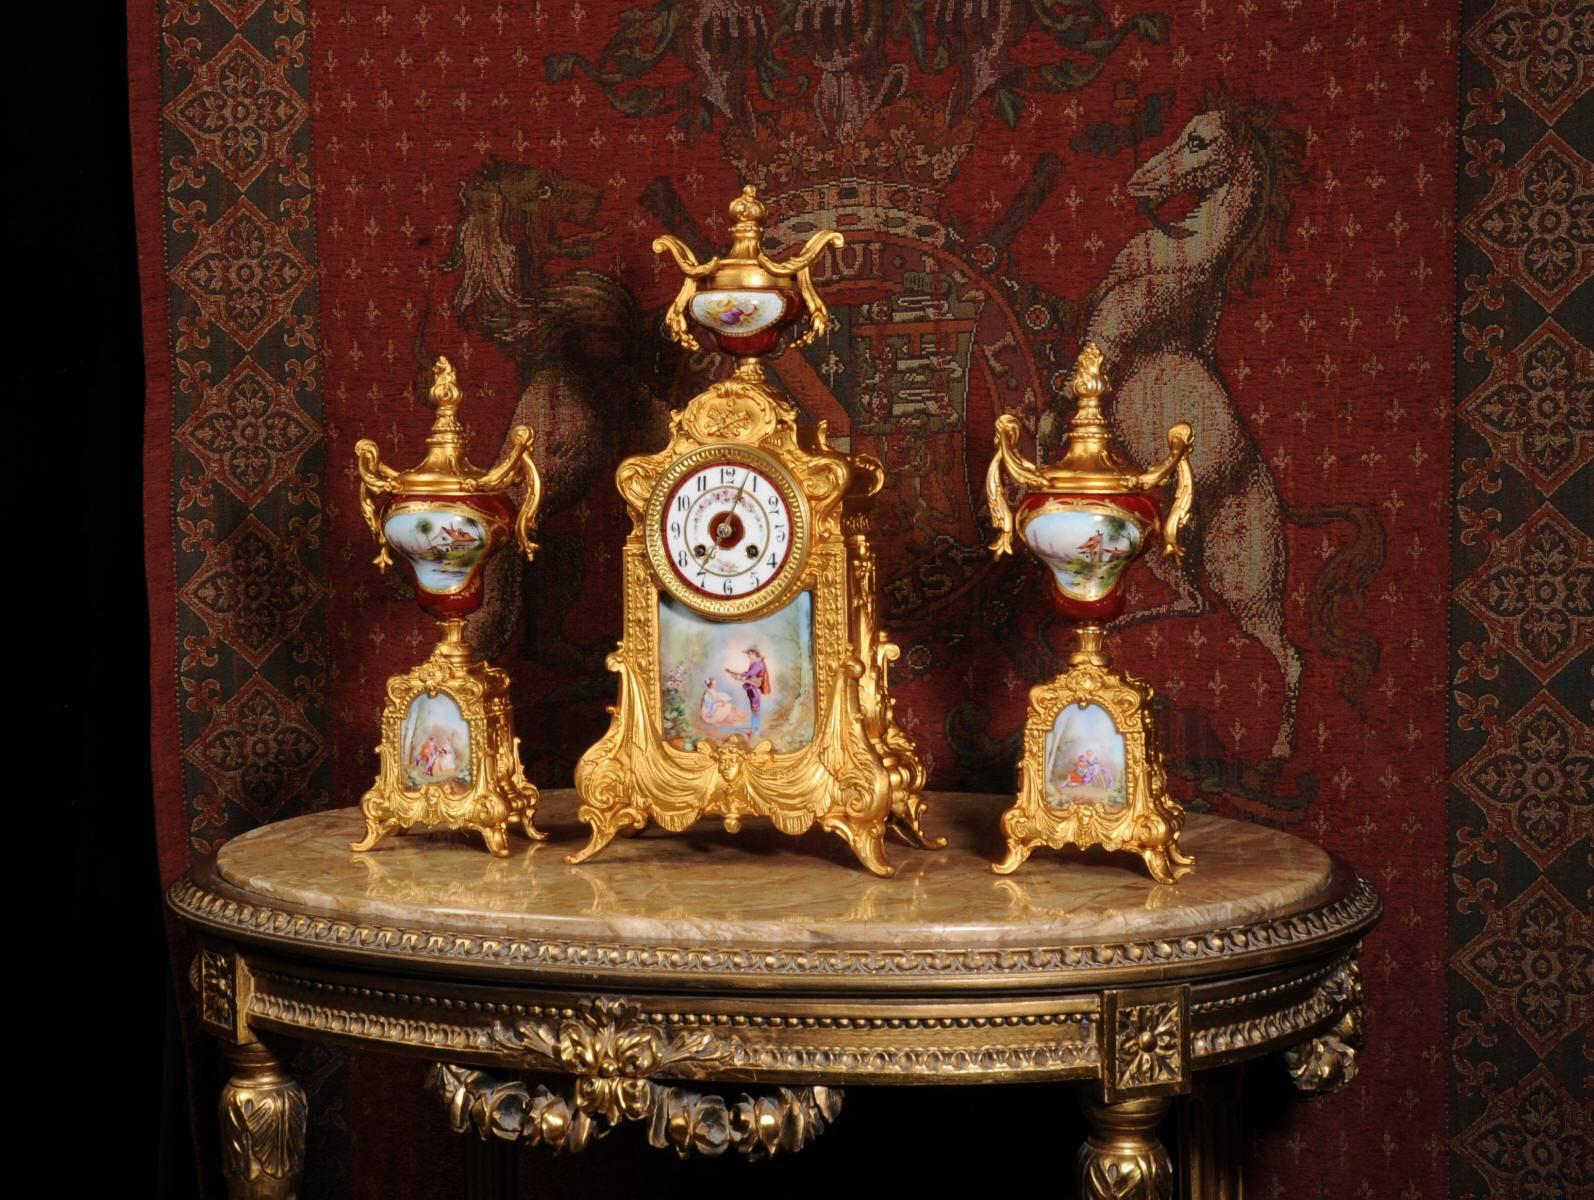 A large and very decorative gilt metal clock set mounted with exquisitely painted Sèvres style porcelain urns and panels. The panels show scenes of a young couple in a country setting, in one he plays the lute to her, in another they drink wine and